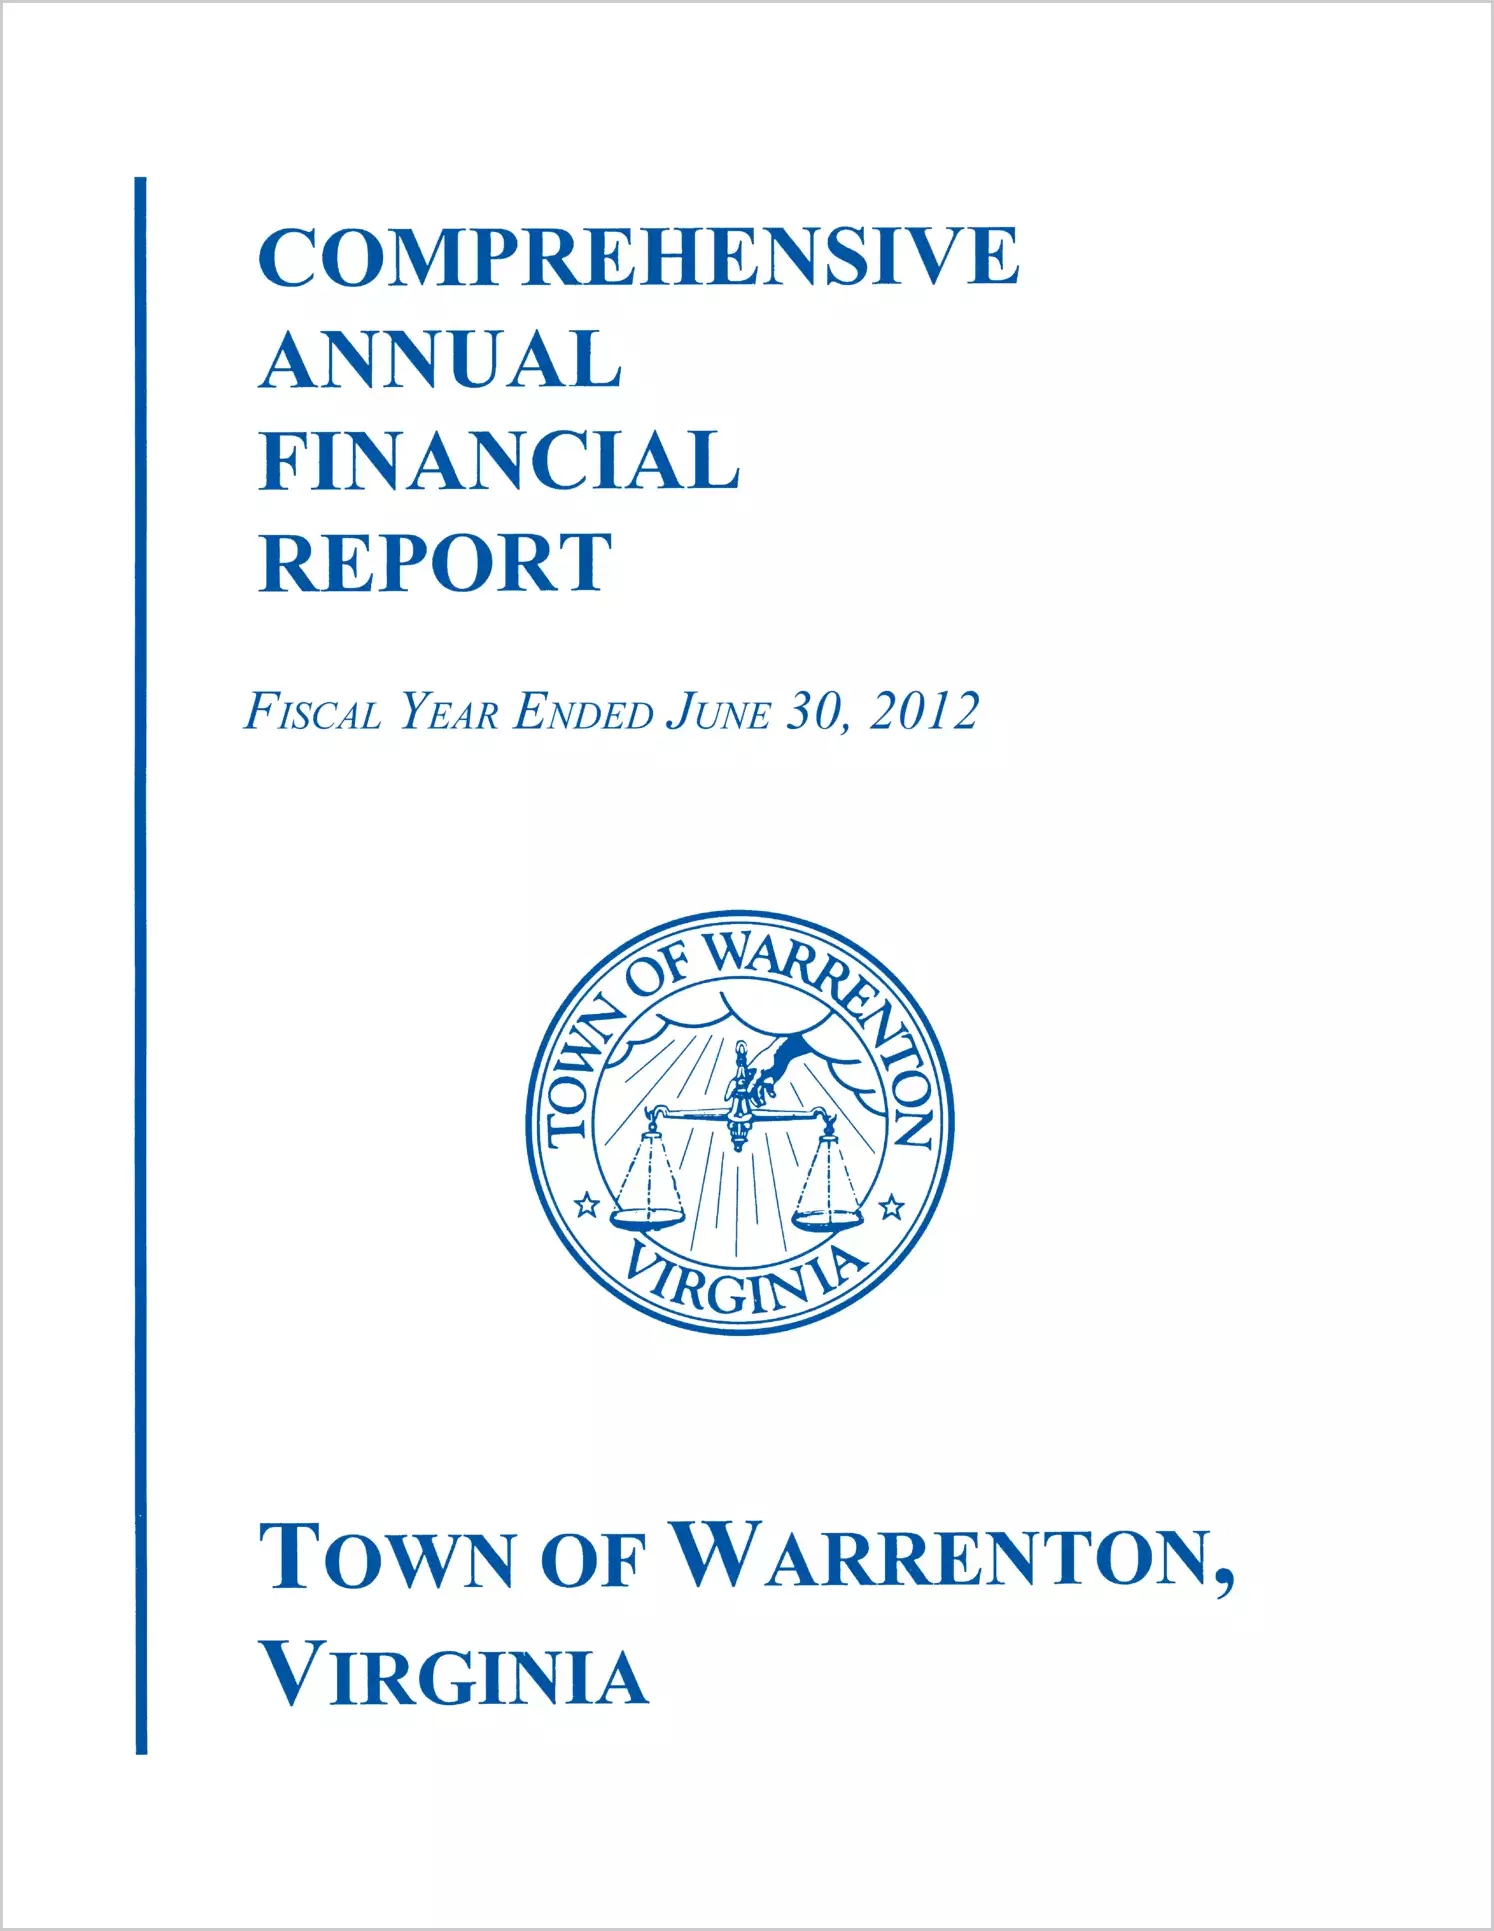 2012 Annual Financial Report for Town of Warrenton